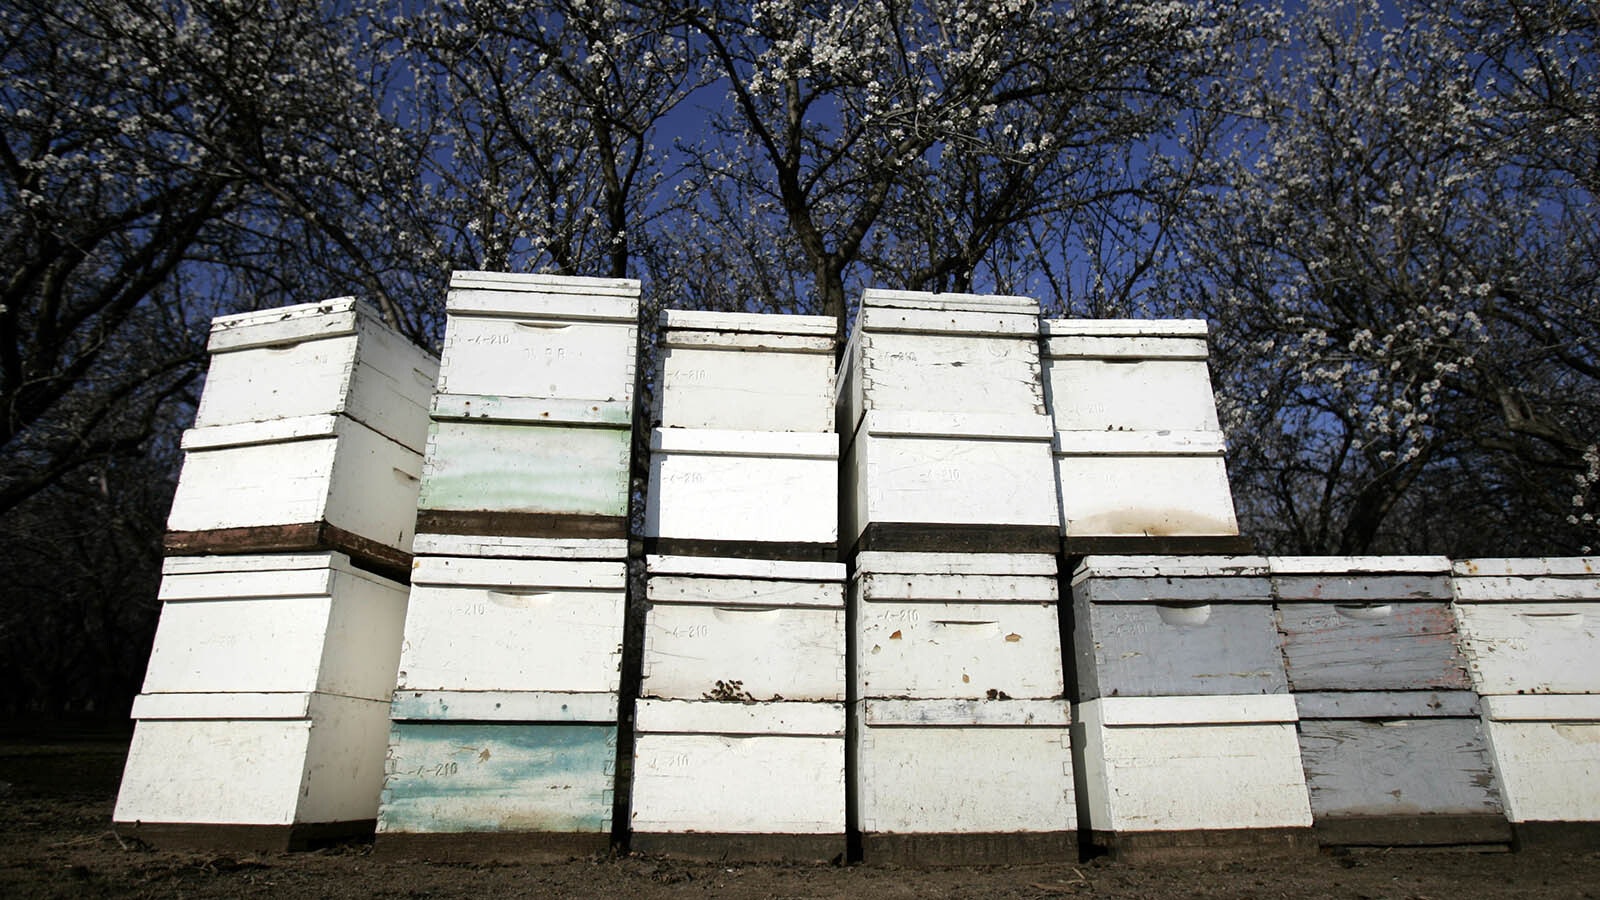 Beehives are placed near almond groves in California.